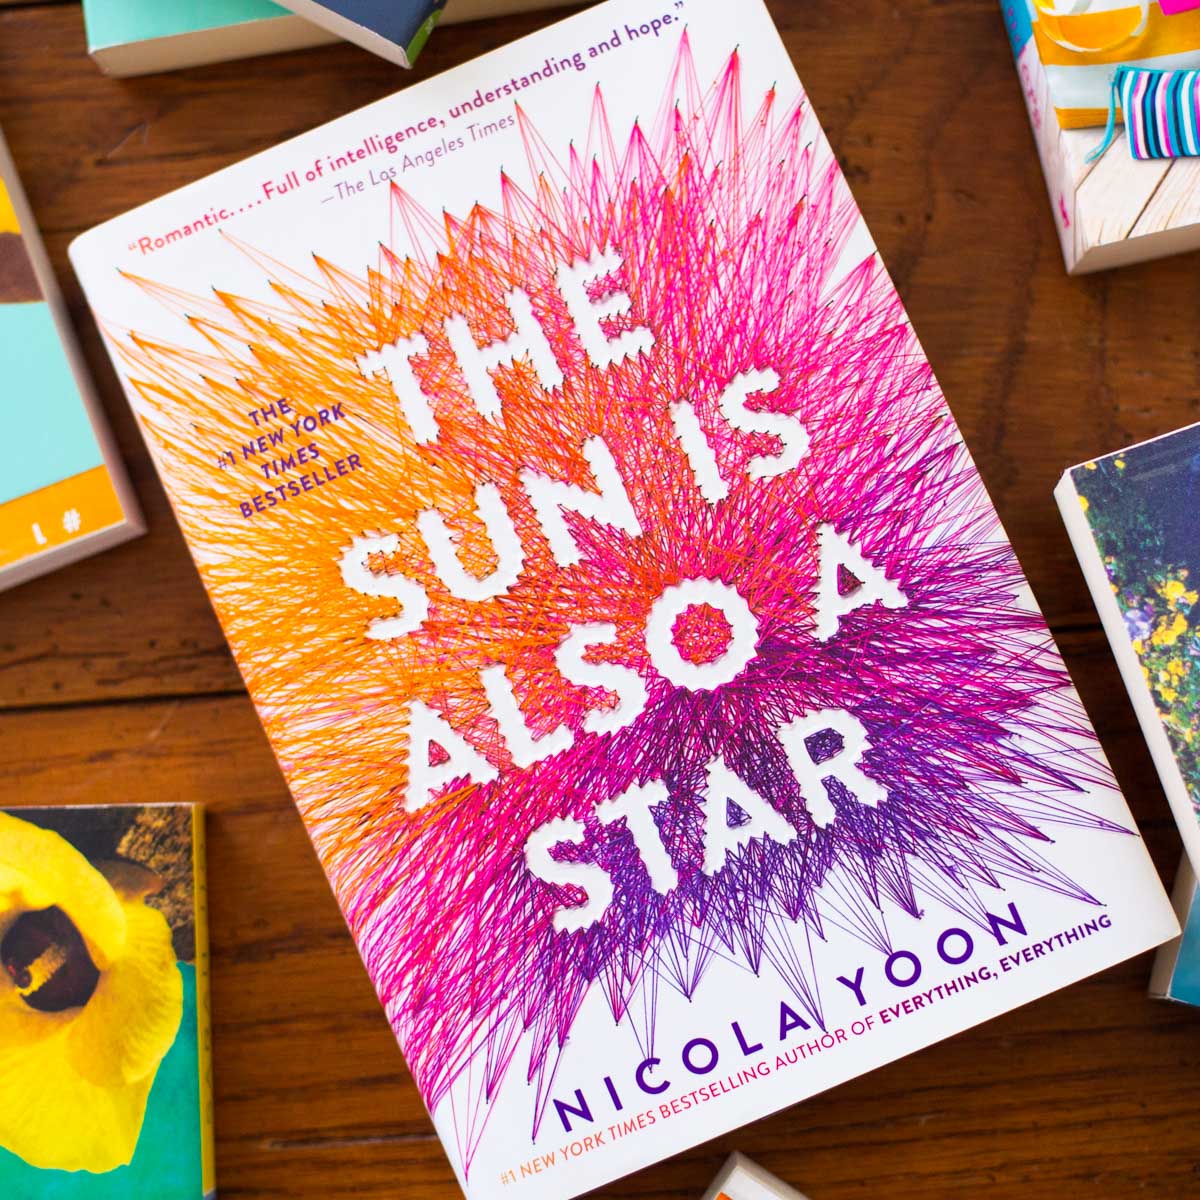 A copy of the book The Sun is Also a Star is on the table.